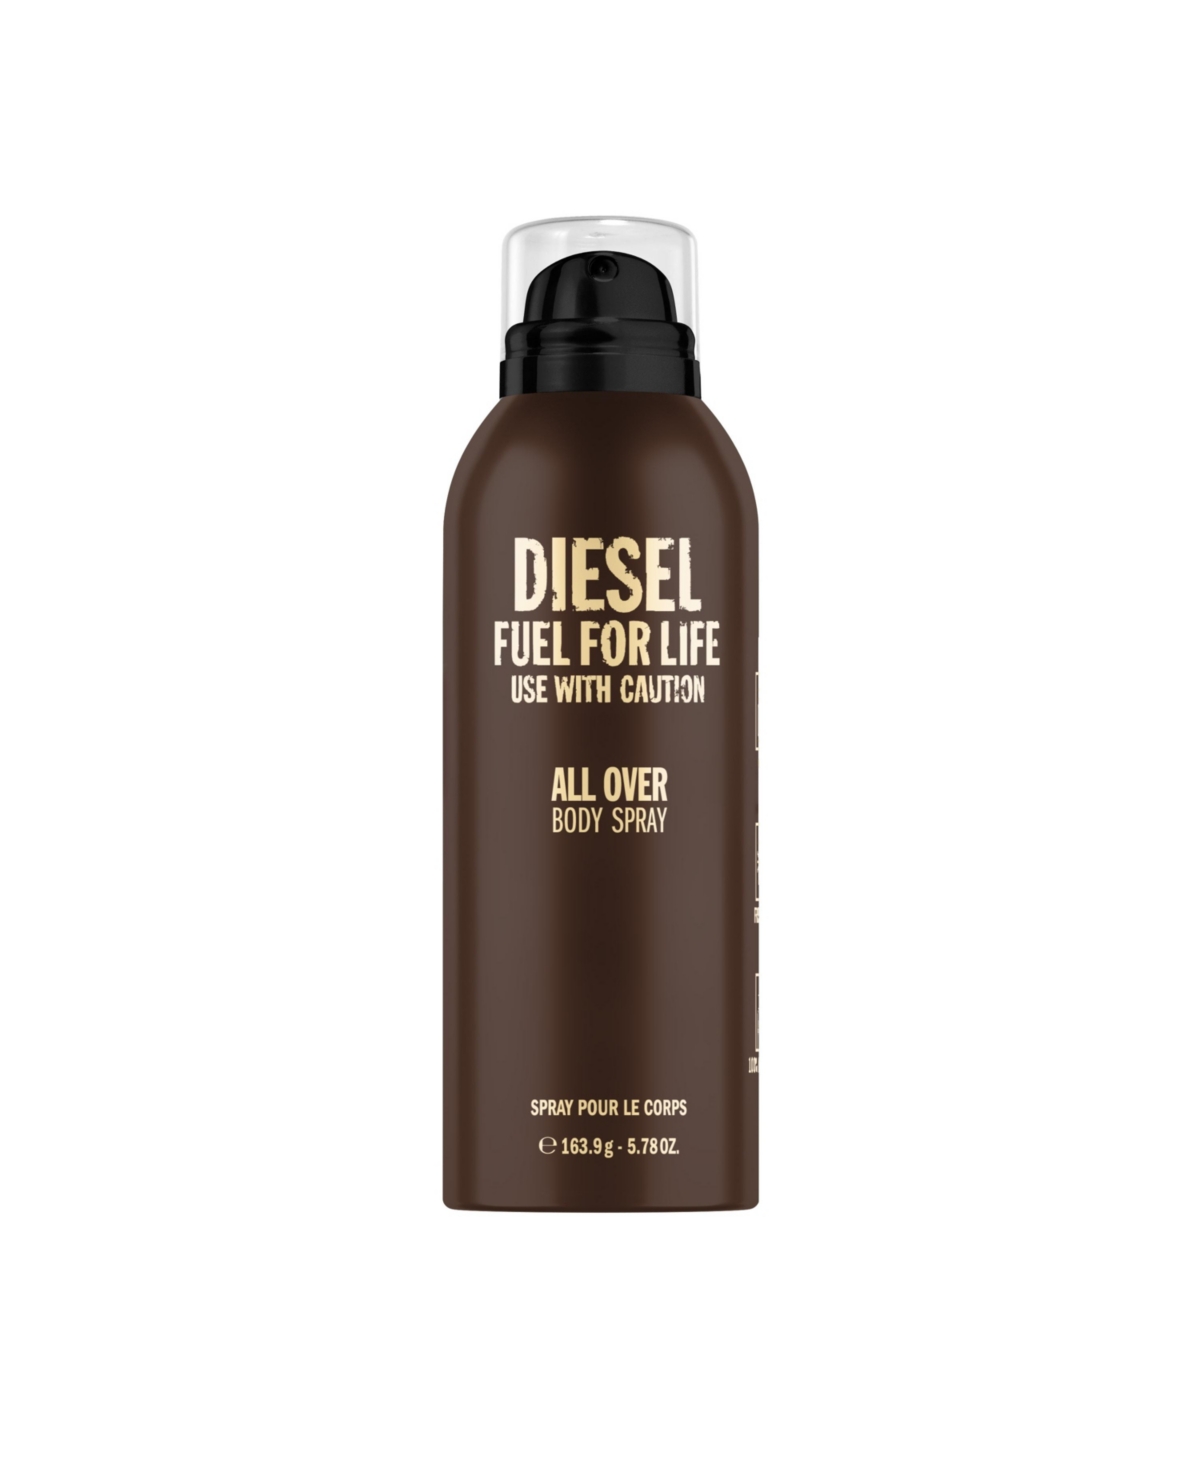 Diesel Fuel For Life All Over Body Spray, 5.78 oz.